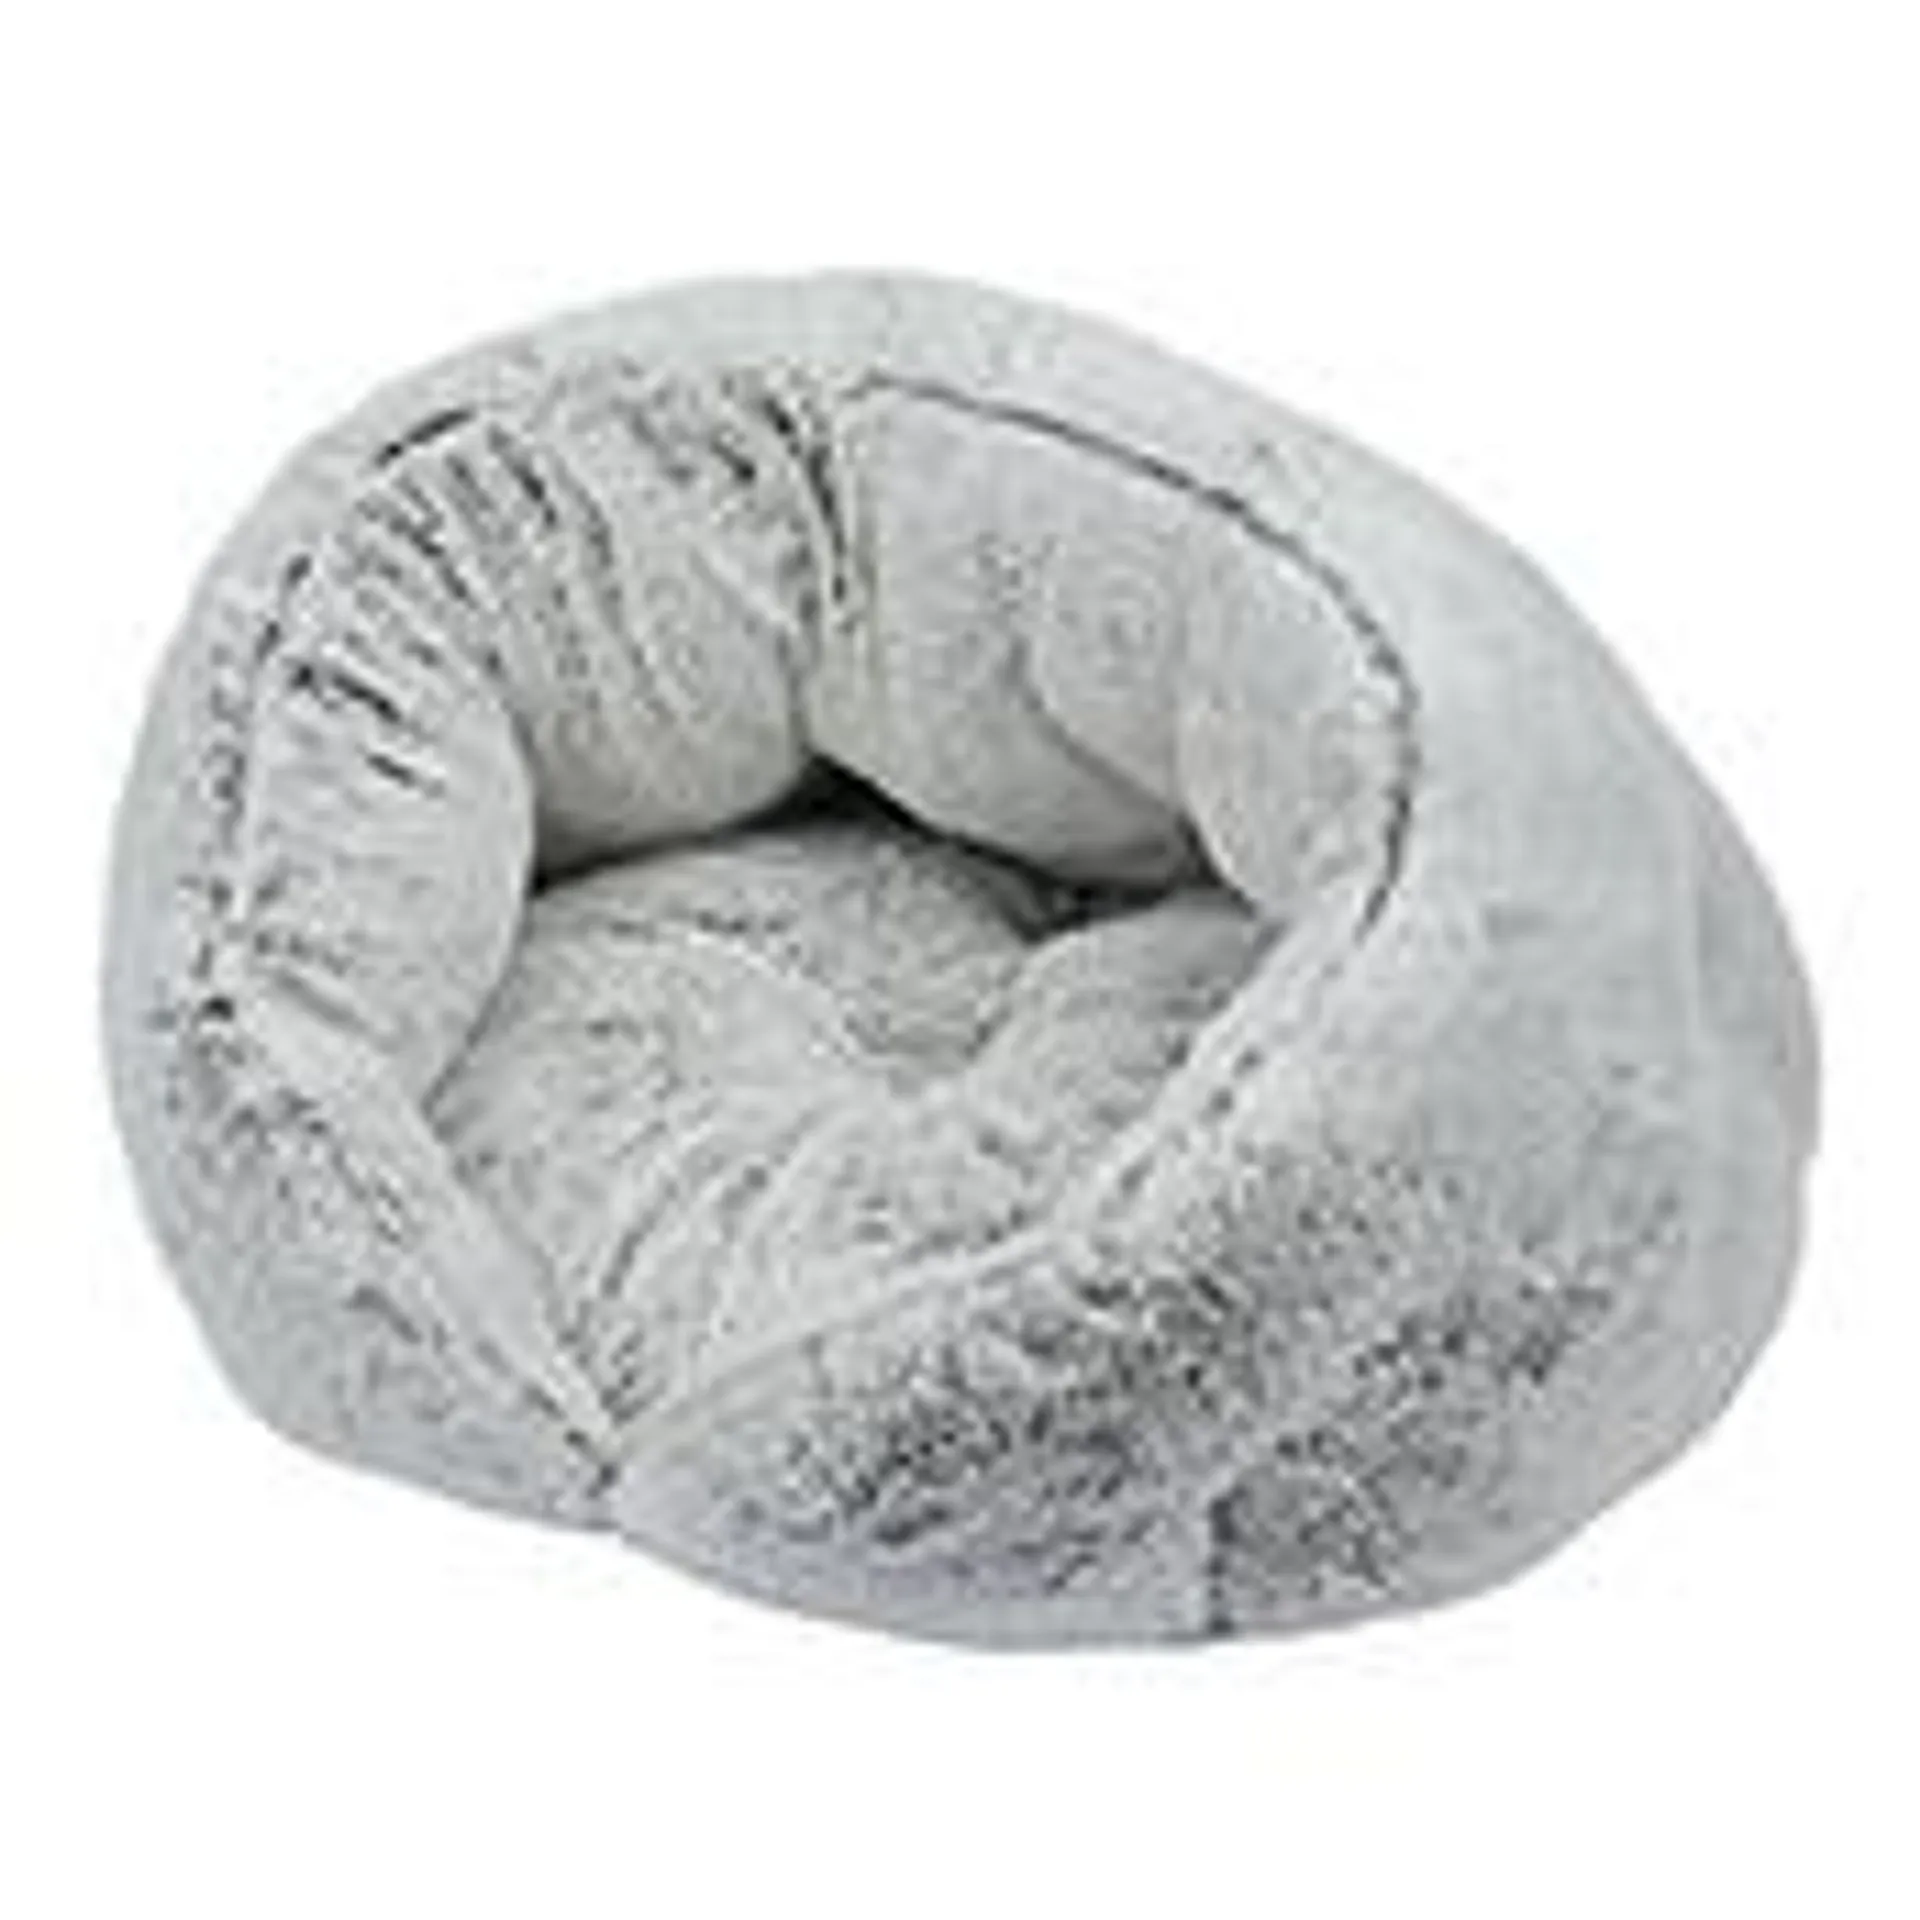 Pets at Home Plush Cuddle Cat Bed Grey